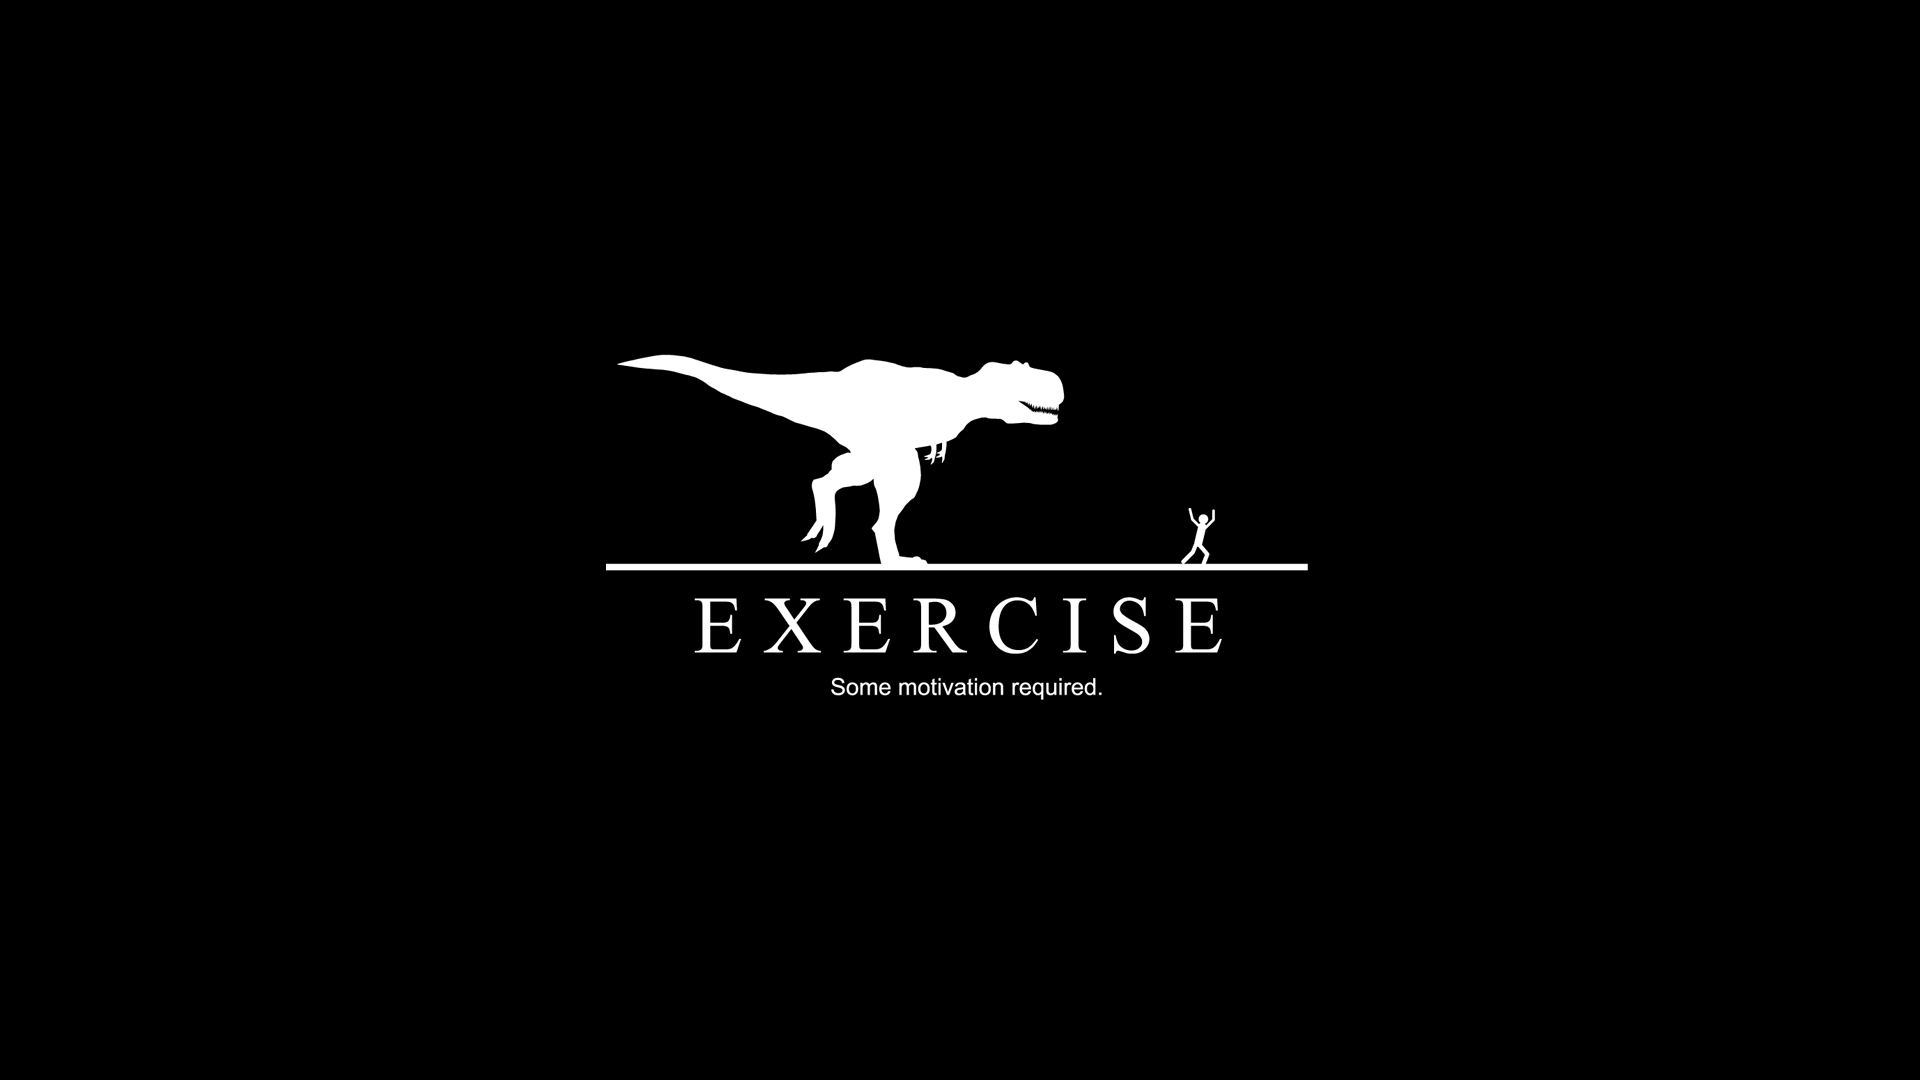 Exercise Some Motivation Required wallpaper